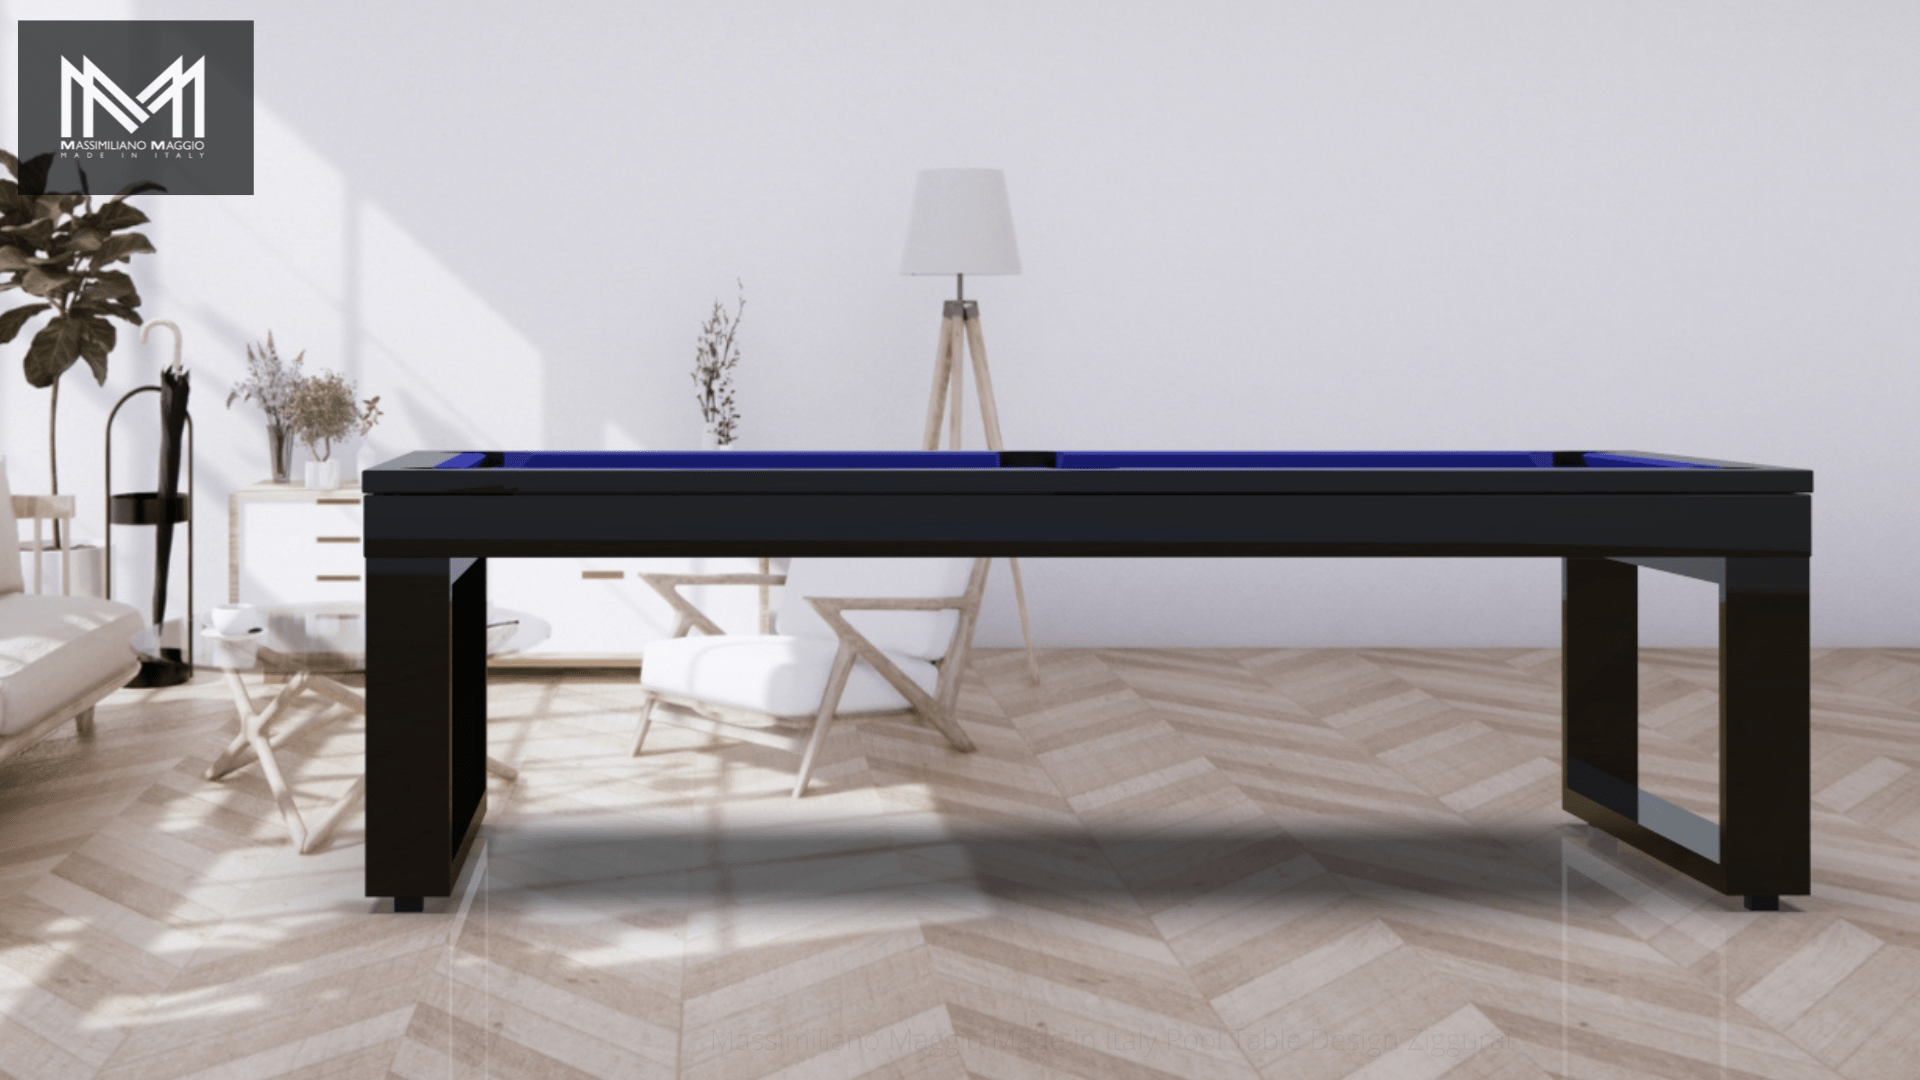 Luxury Pool Table 1 NEW Icon Exclusive Pool table by Massimiliano Maggio Made in Italy